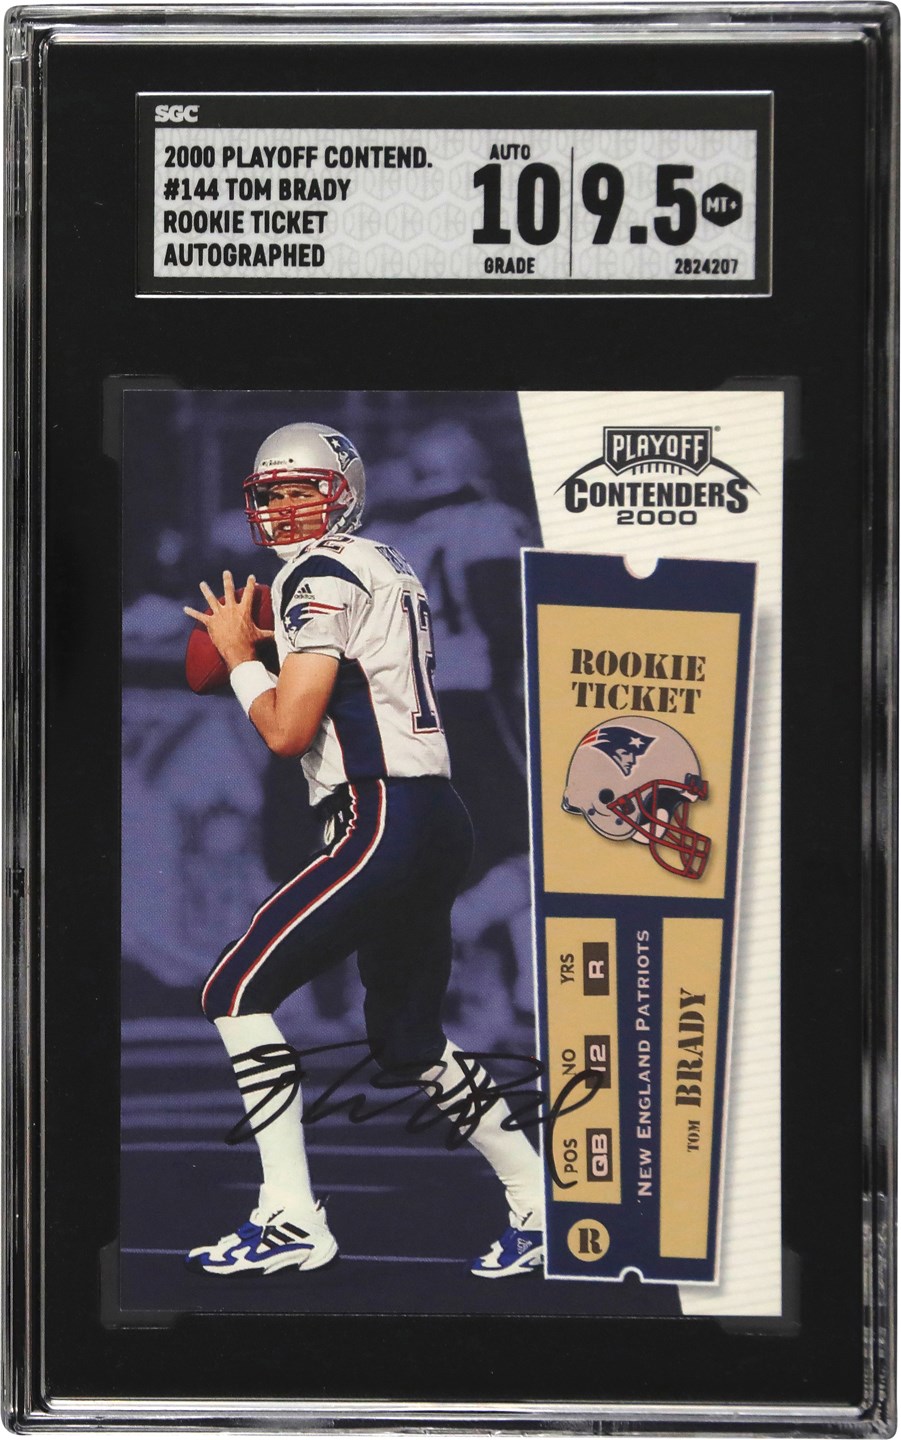 Modern Sports Cards - 00 Playoff Contenders Rookie Ticket #144 Tom Brady Autograph SGC MINT+ 9.5 - Auto 10 (Pop 1 of 1)